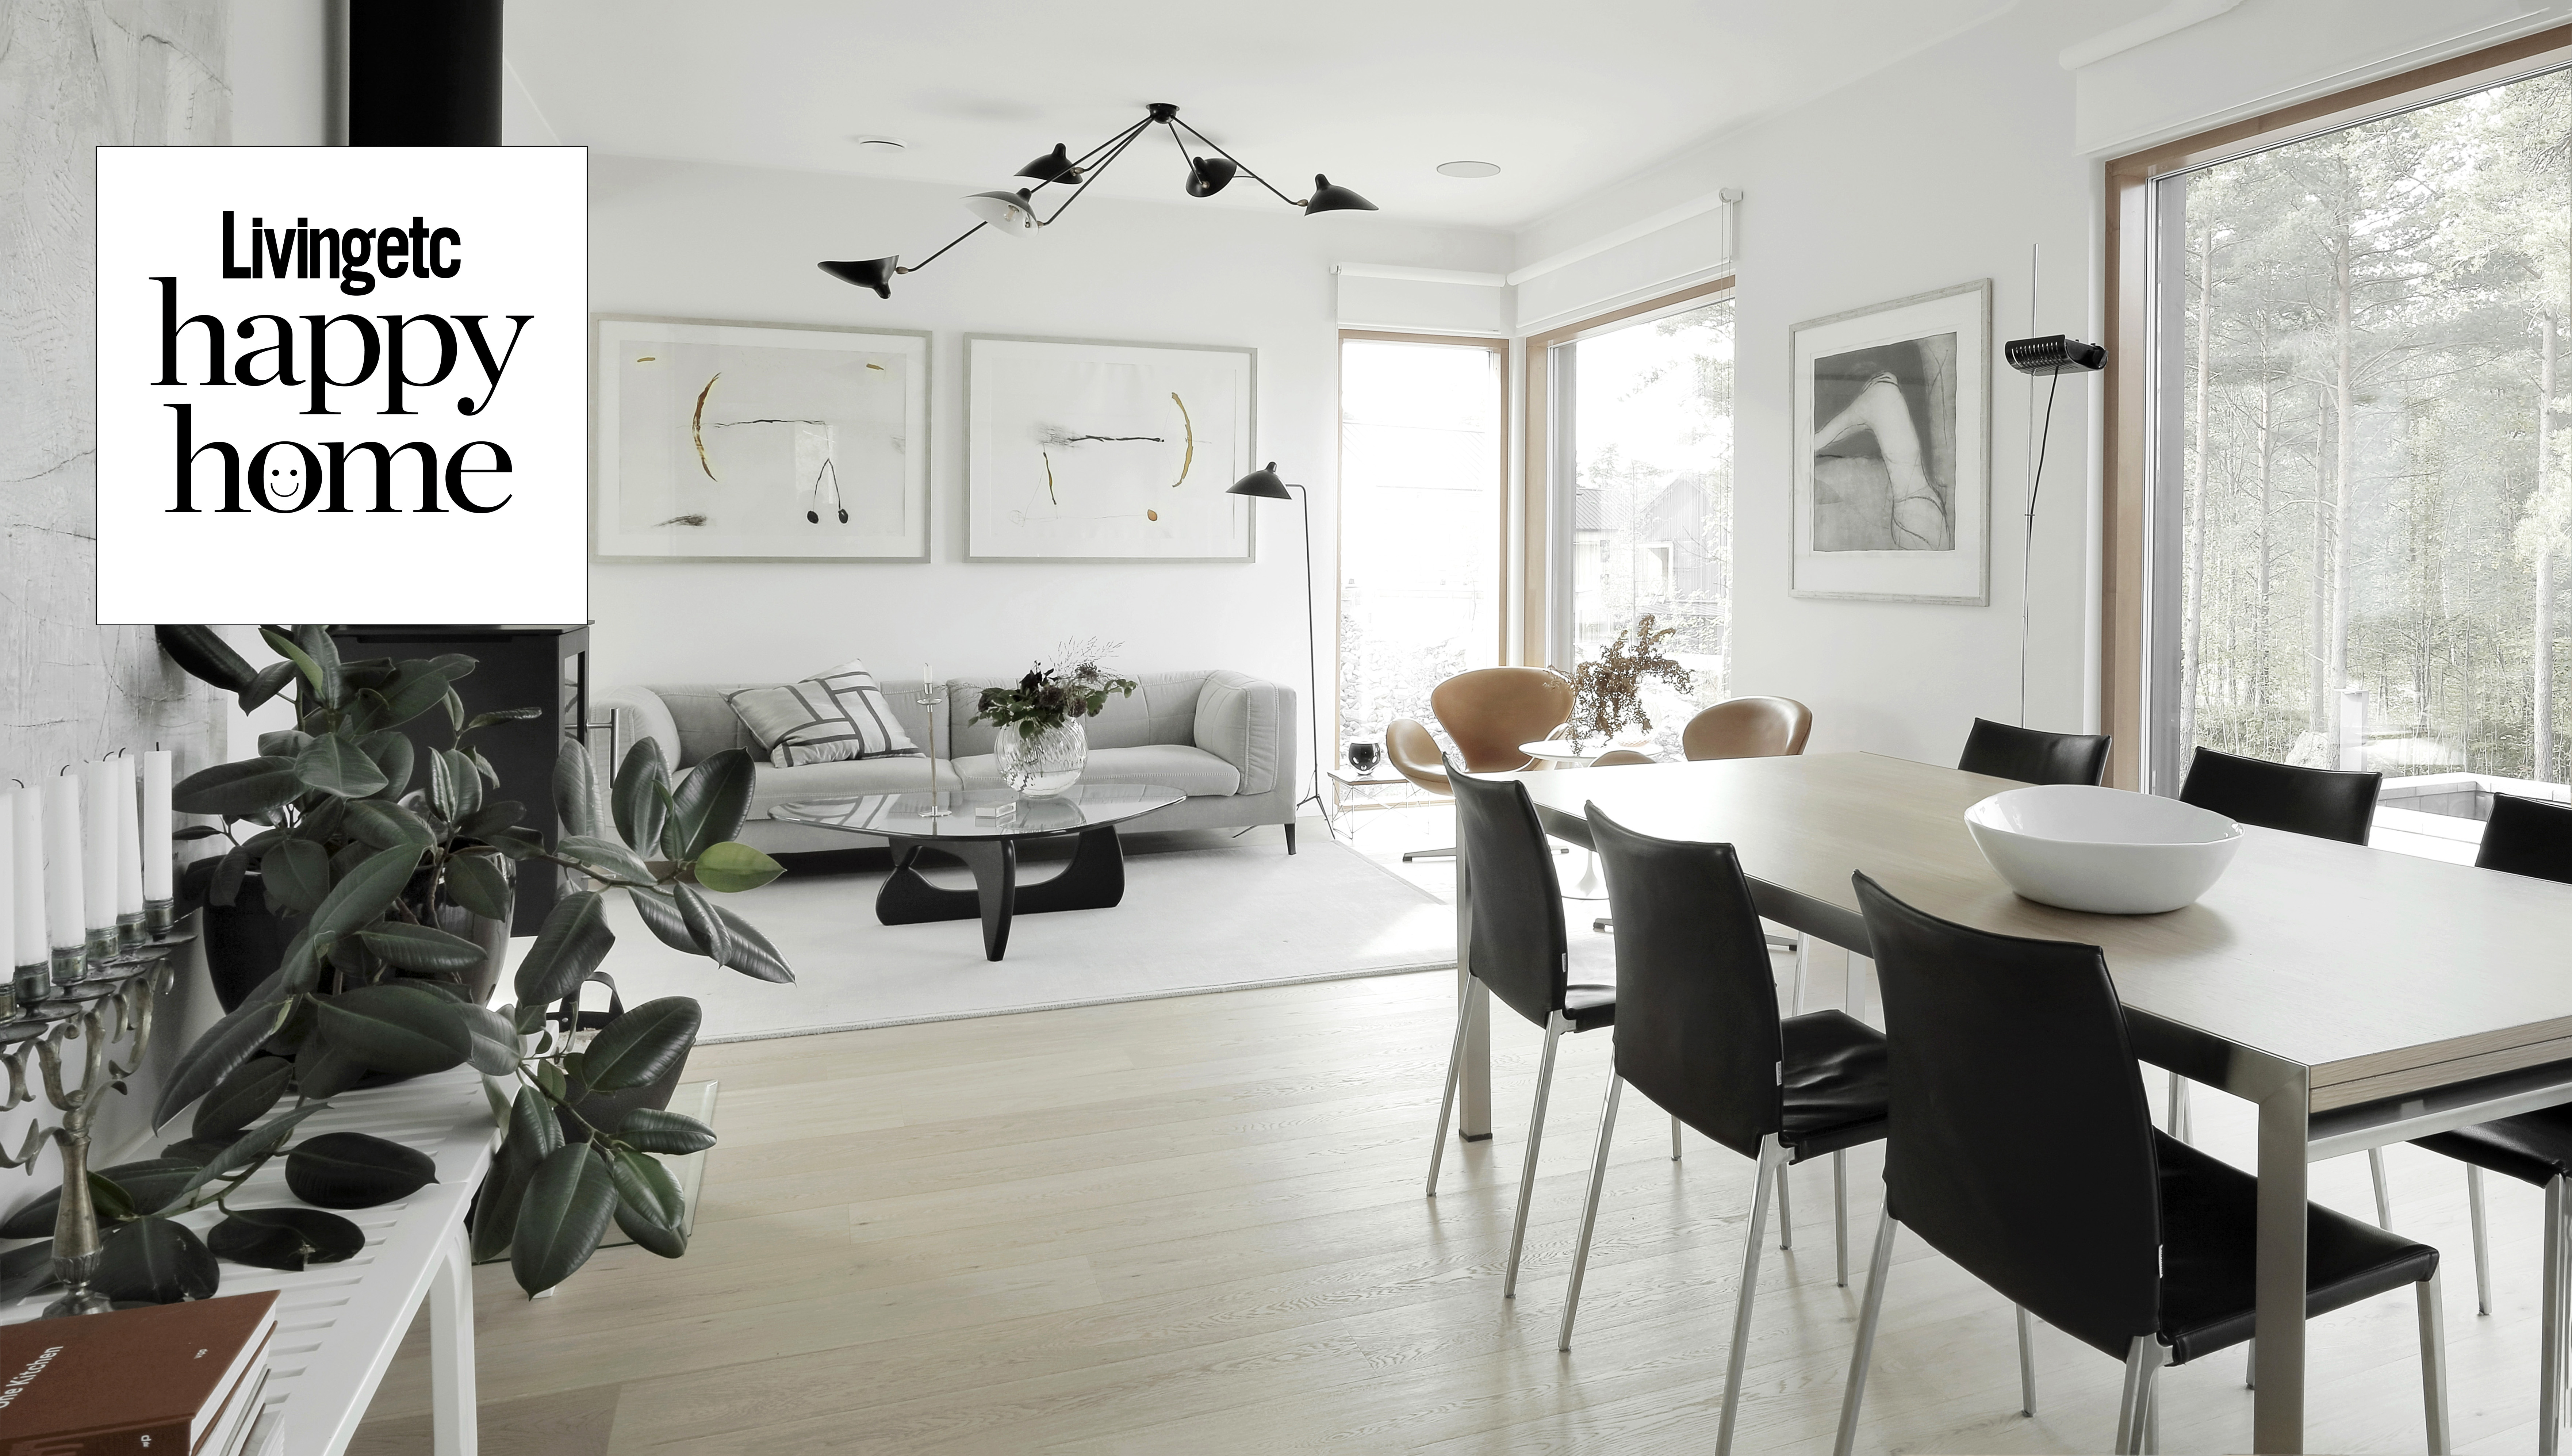 Finnish interior design style tips for creating a happy home | Livingetc